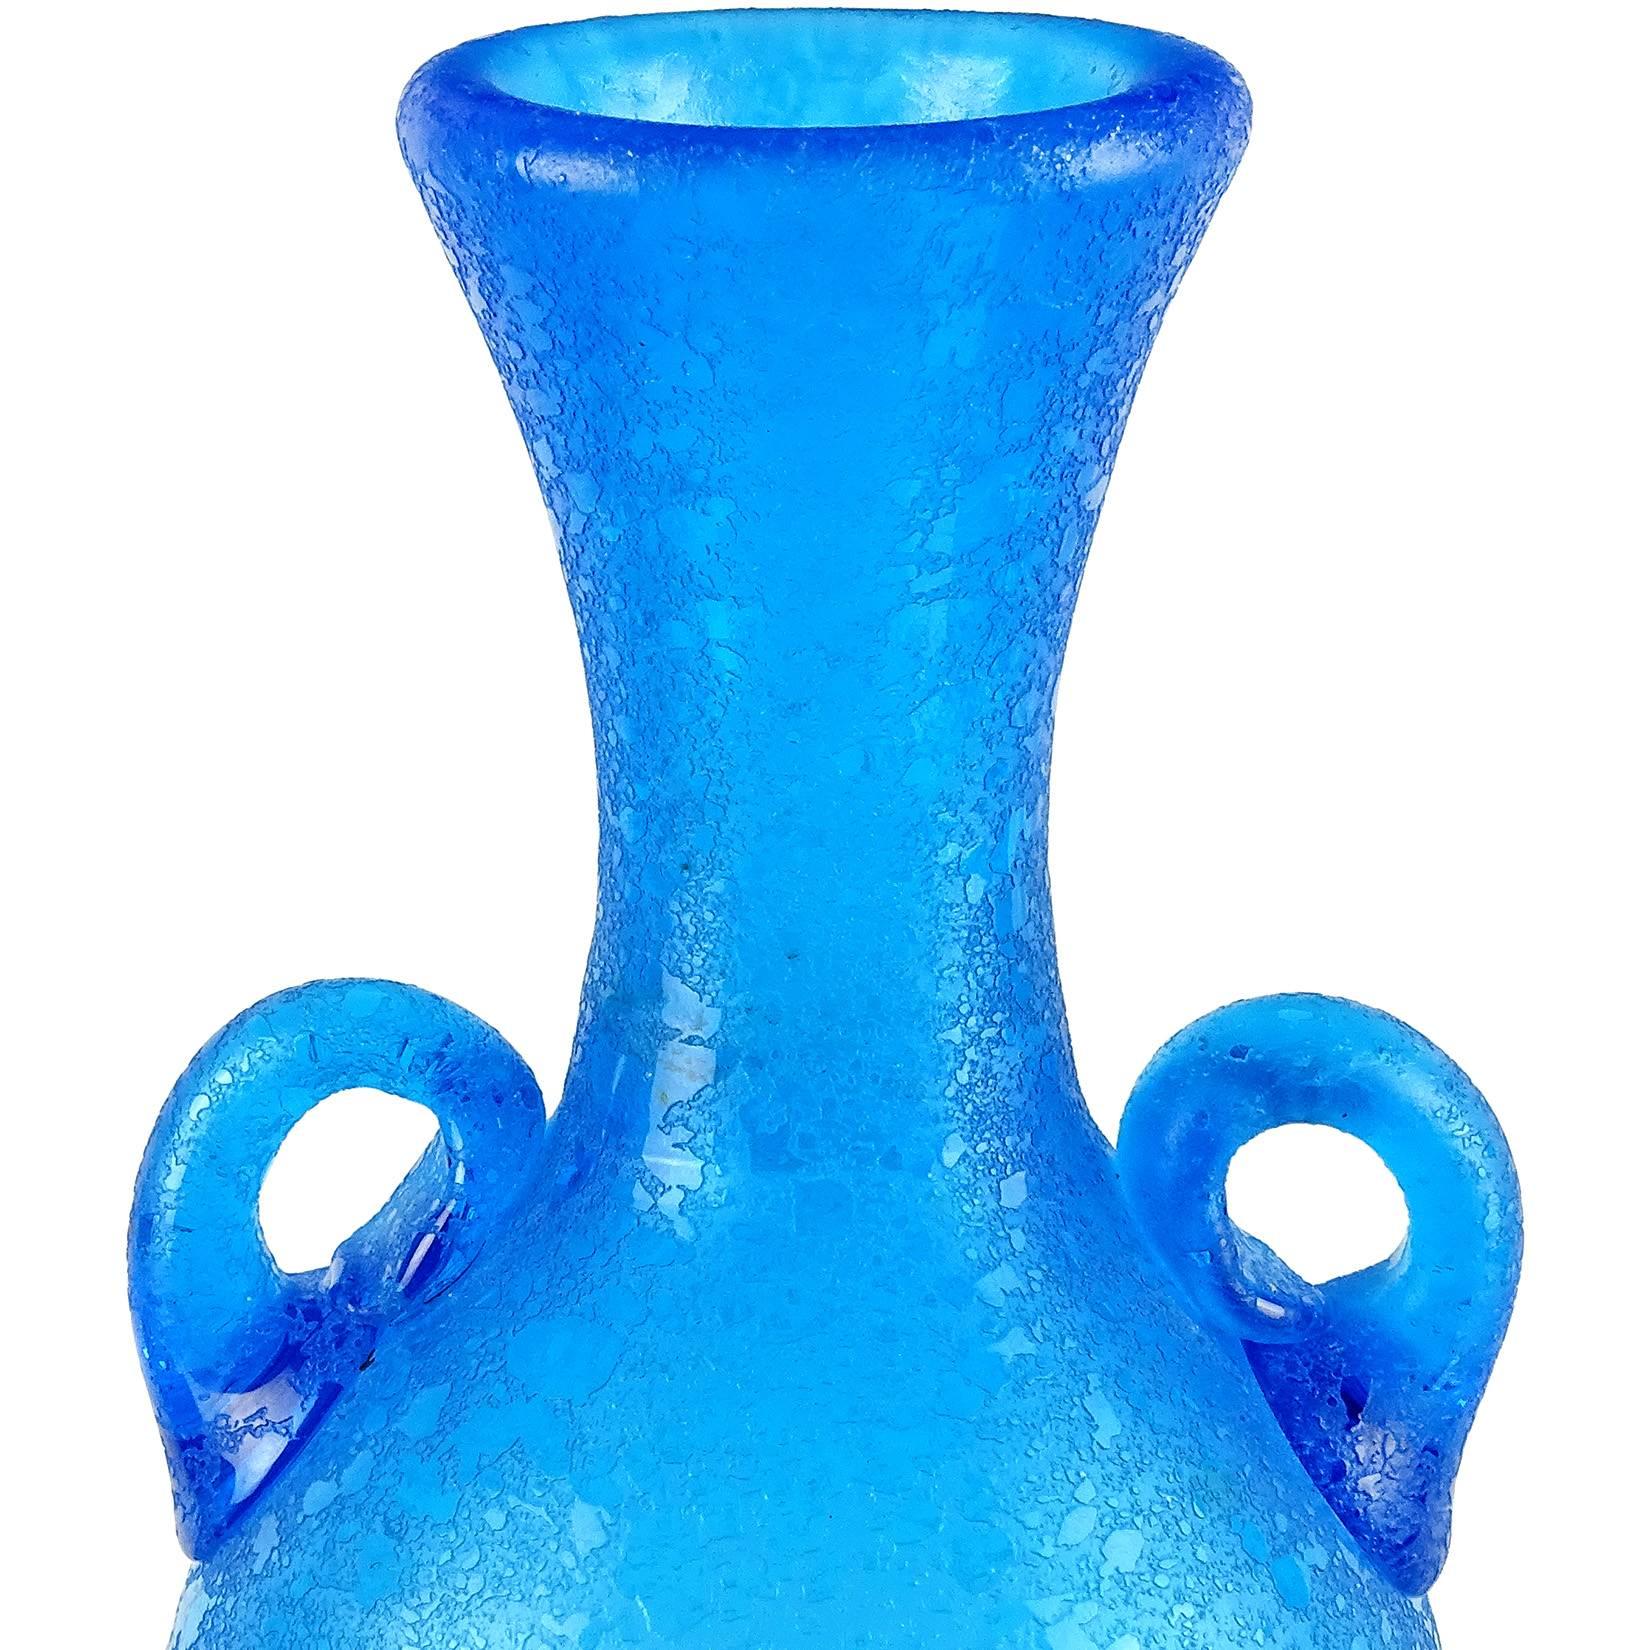 Beautiful vintage Murano hand blown, Sommerso cobalt blue with acid texture Italian art glass flower vase. Documented to designer Archimede Seguso, with original 